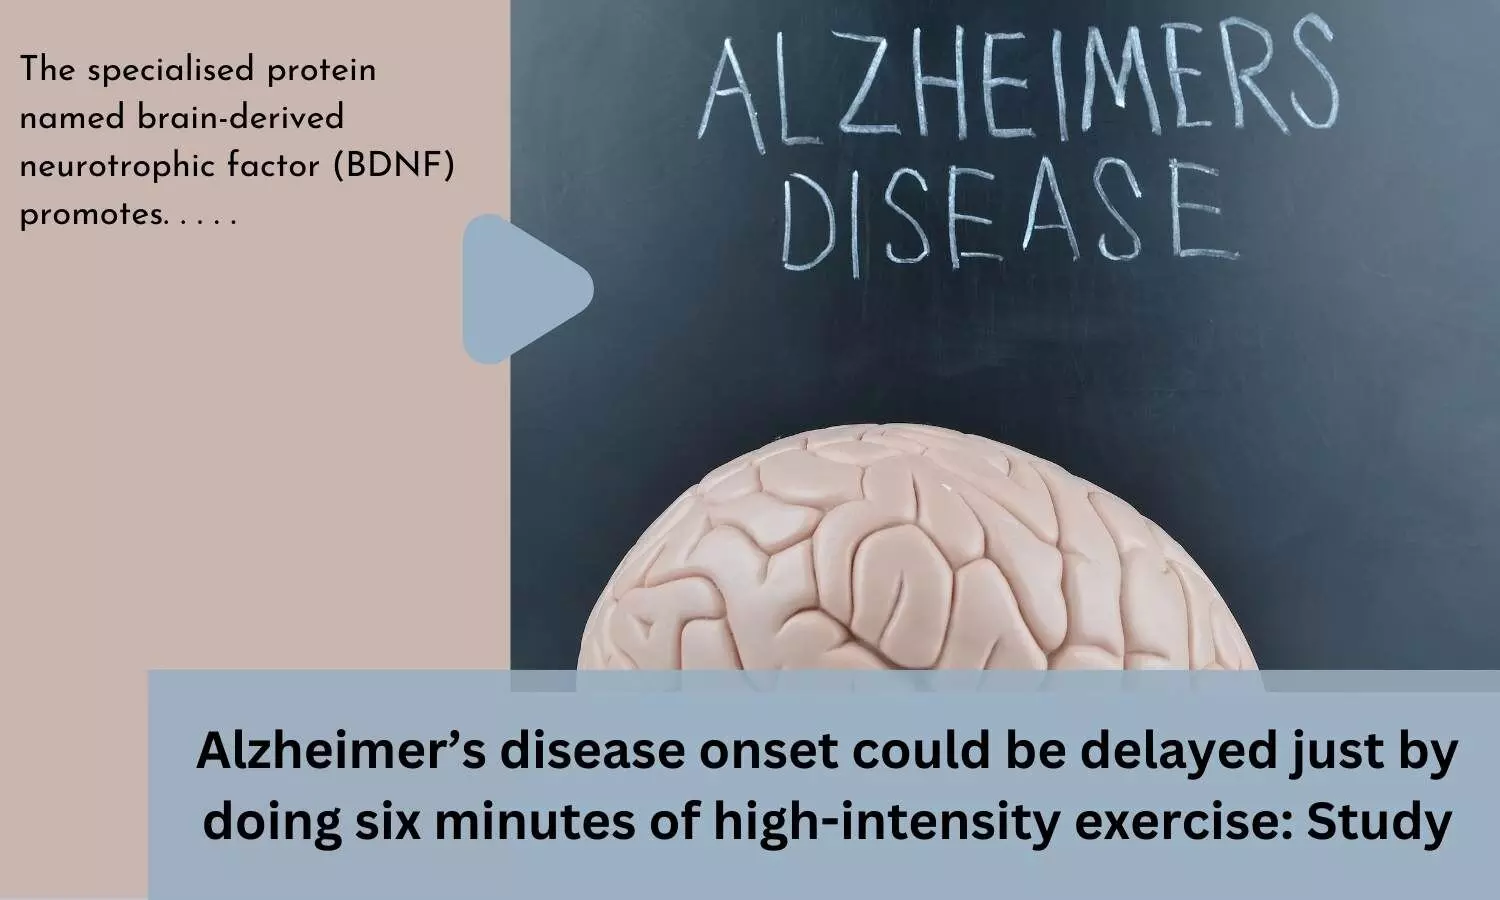 Alzheimers disease onset could be delayed just by doing six minutes of high-intensity exercise: Study